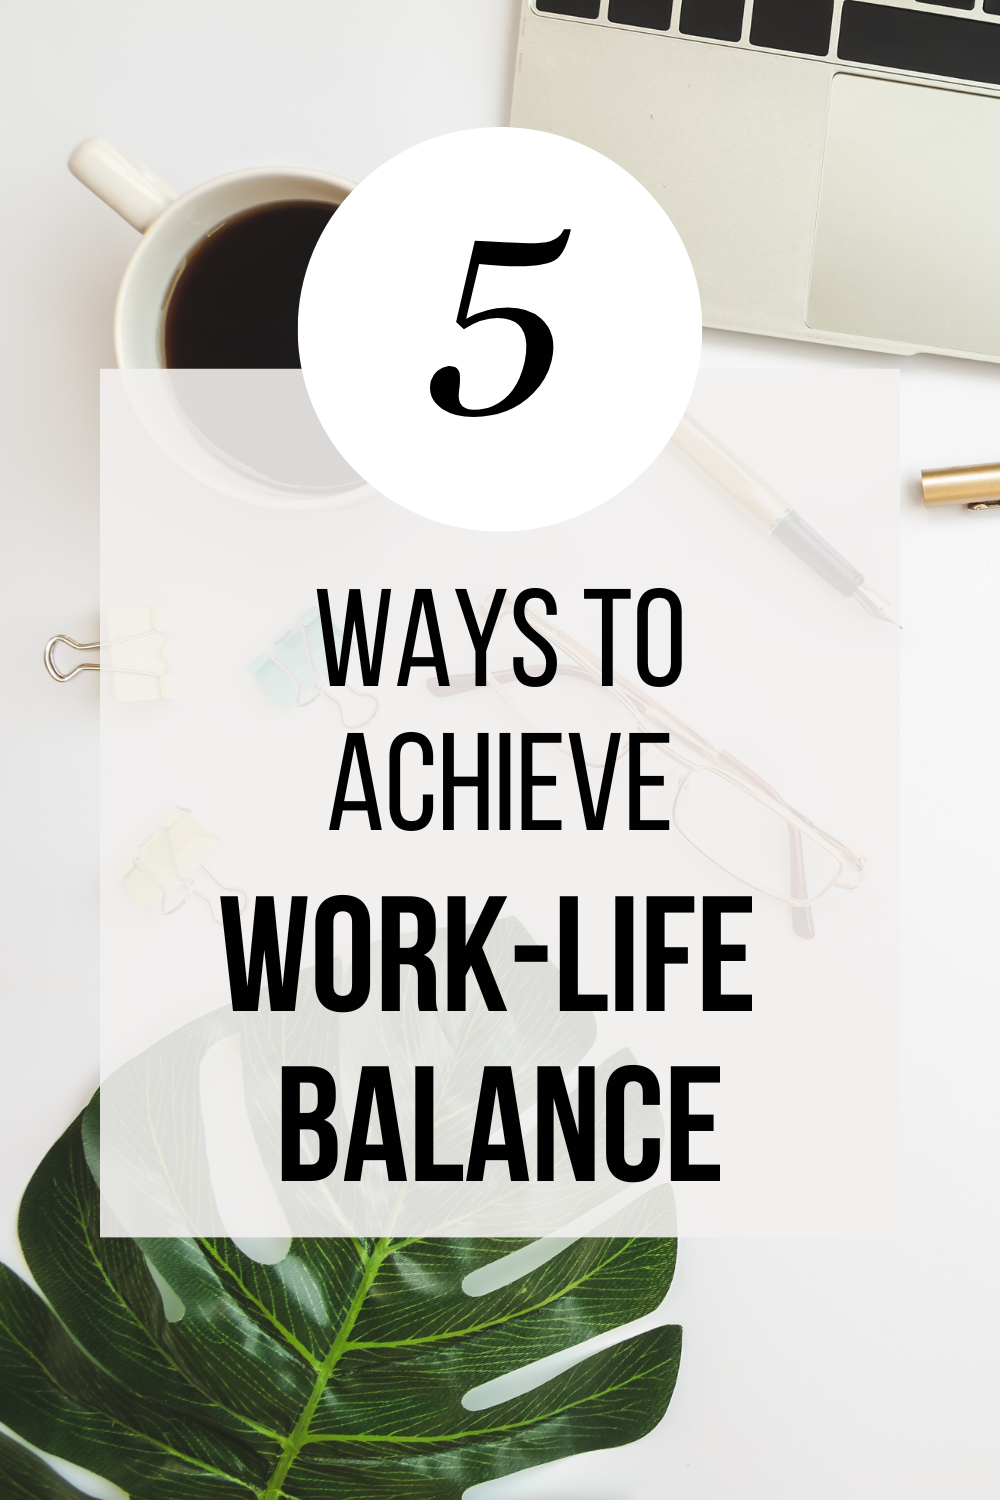 5 Simple Ways to Achieve Work-Life Balance in Today’s Busy World